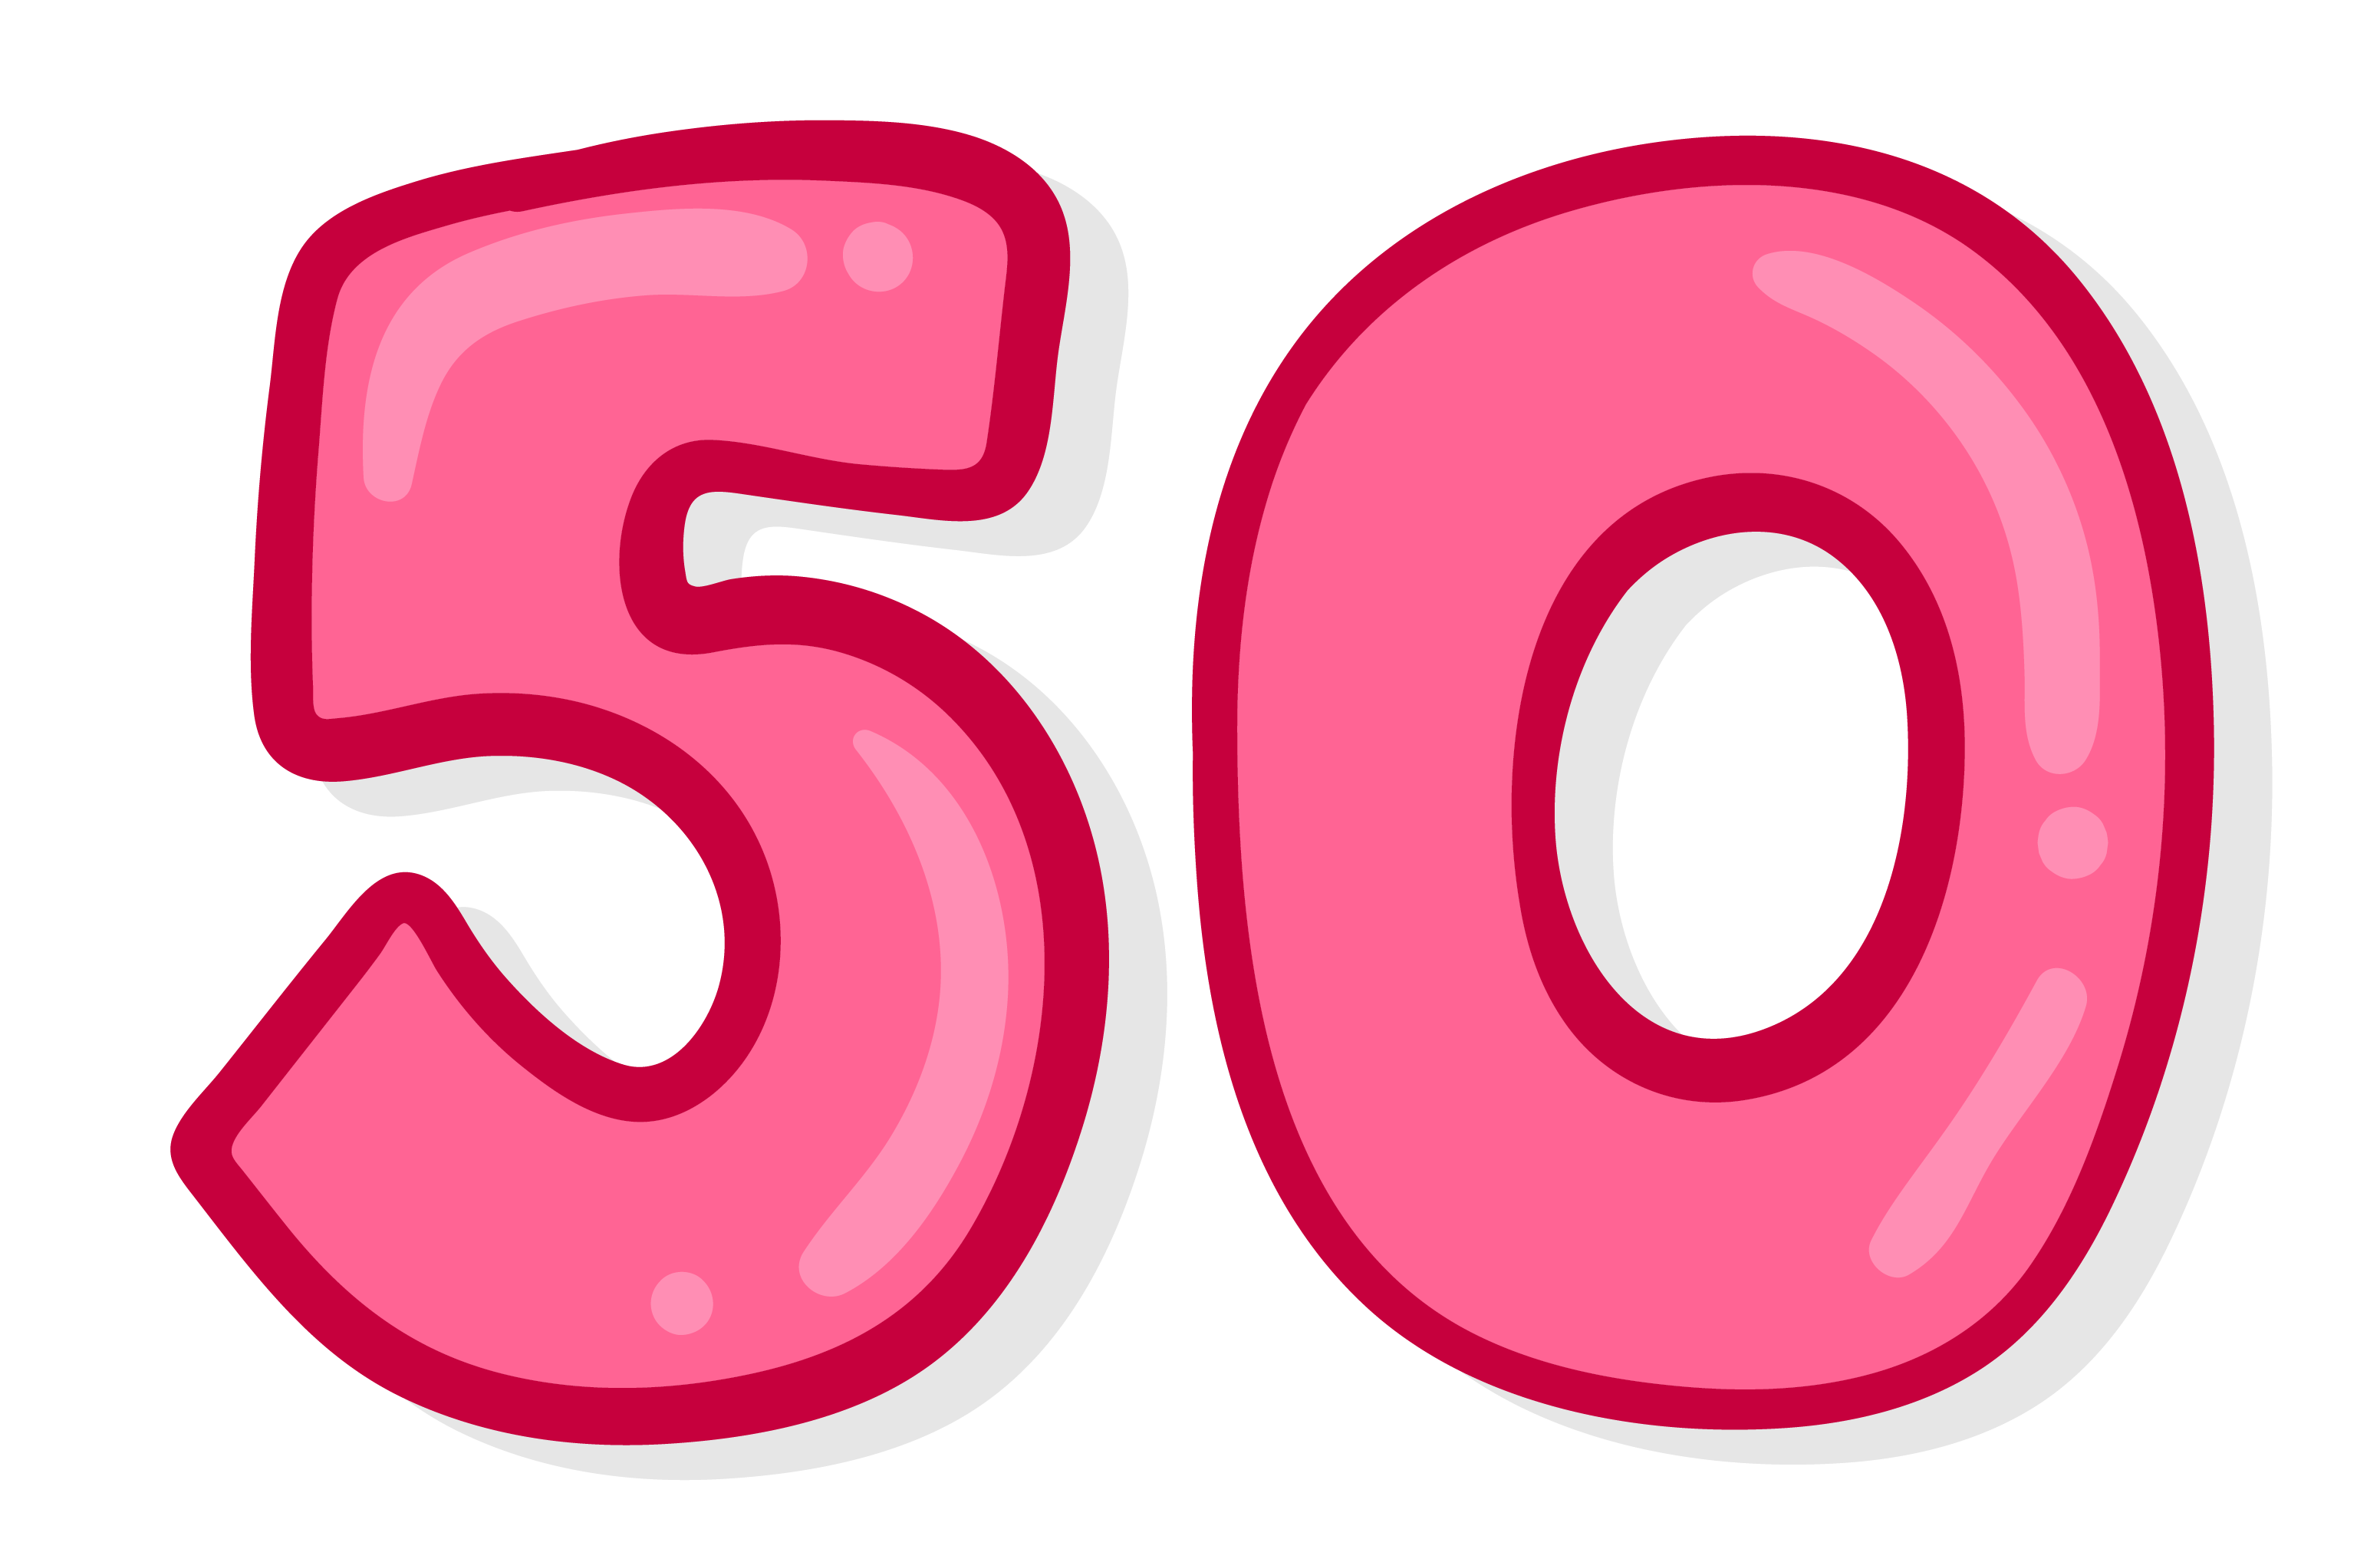 50 Number PNG Free Image